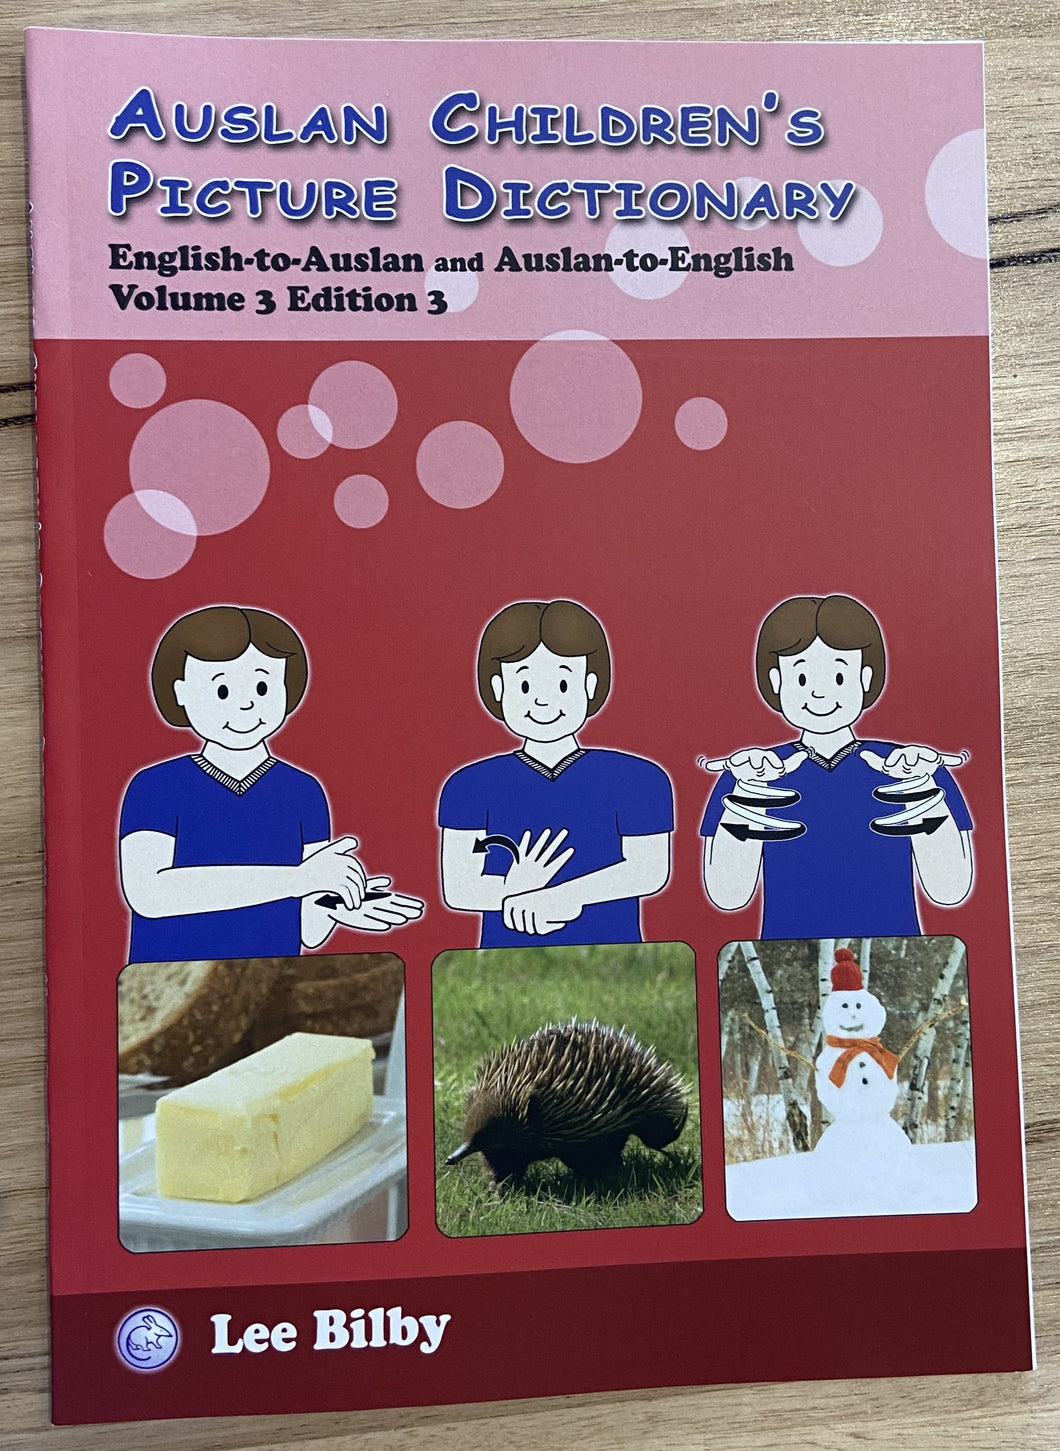 Auslan Childrens Picture Dictionary Volume 3